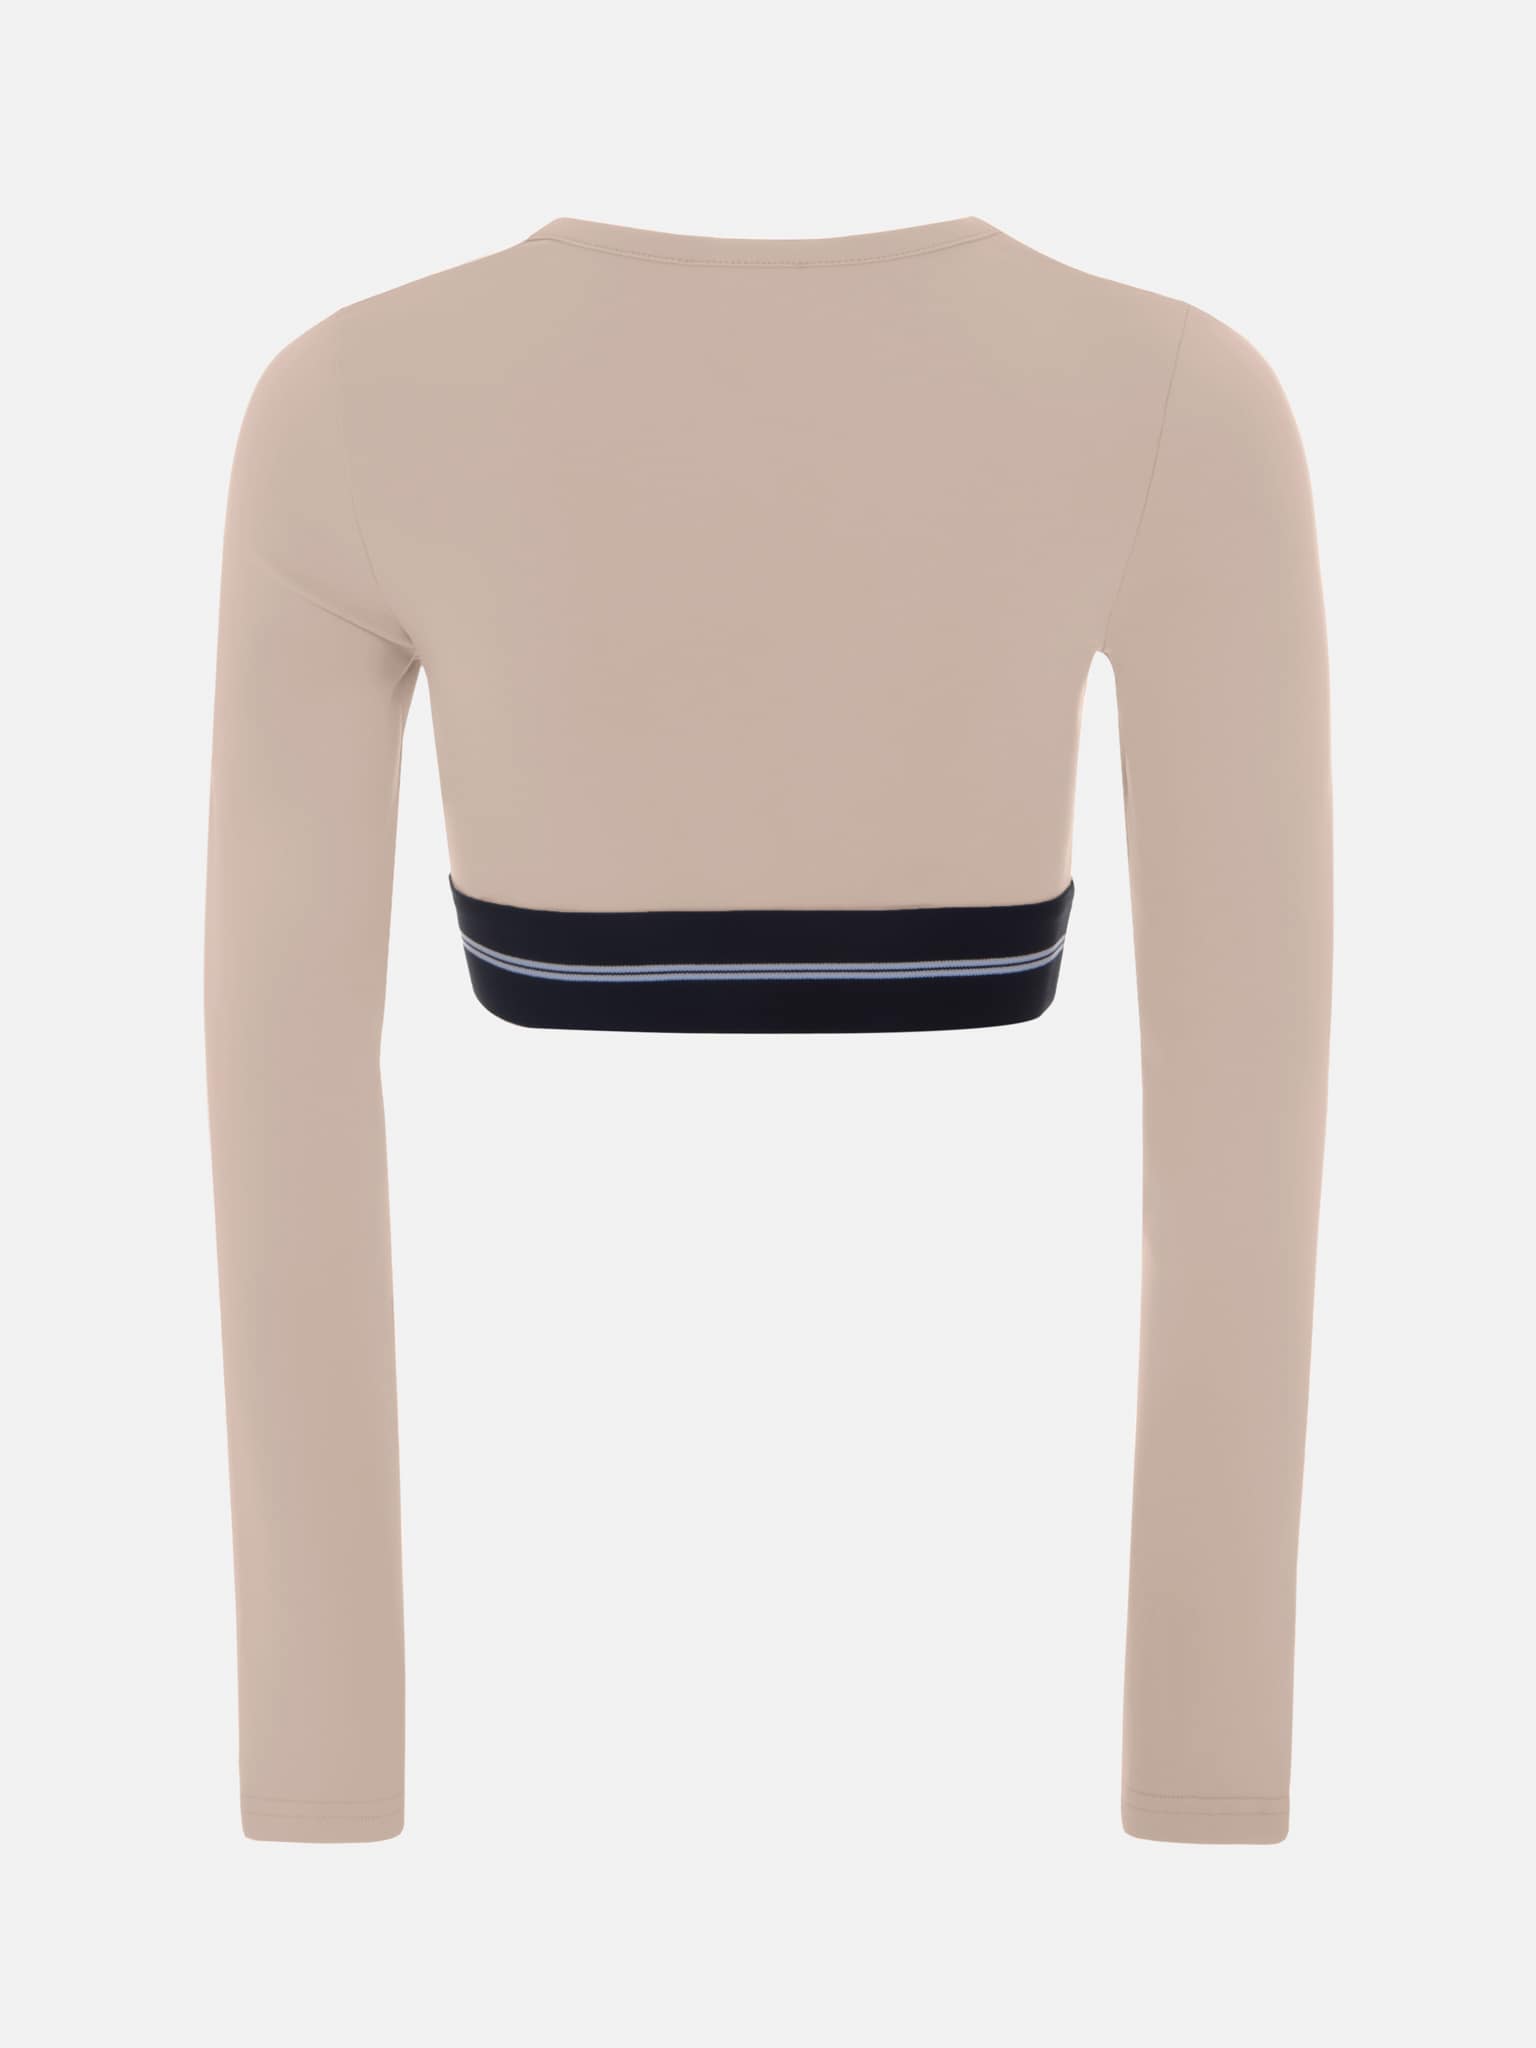 Crop top with wide elastic band